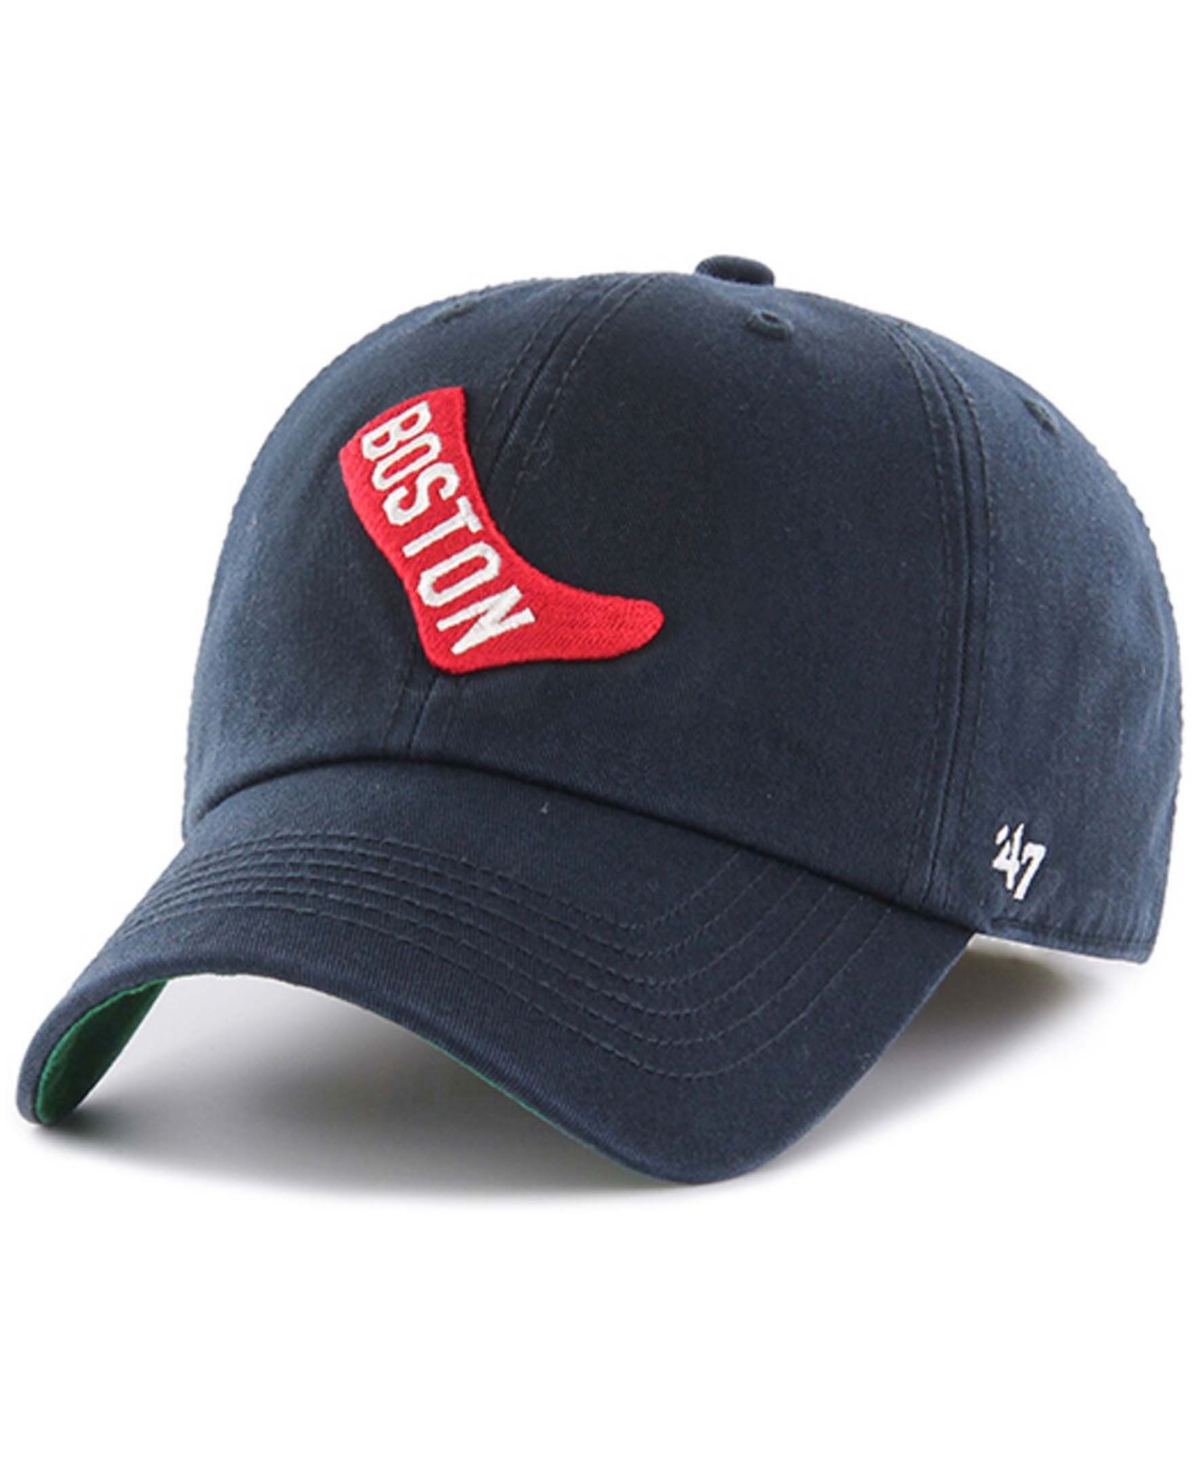 Shop 47 Brand Men's Navy Boston Red Sox Cooperstown Collection Franchise Logo Fitted Hat